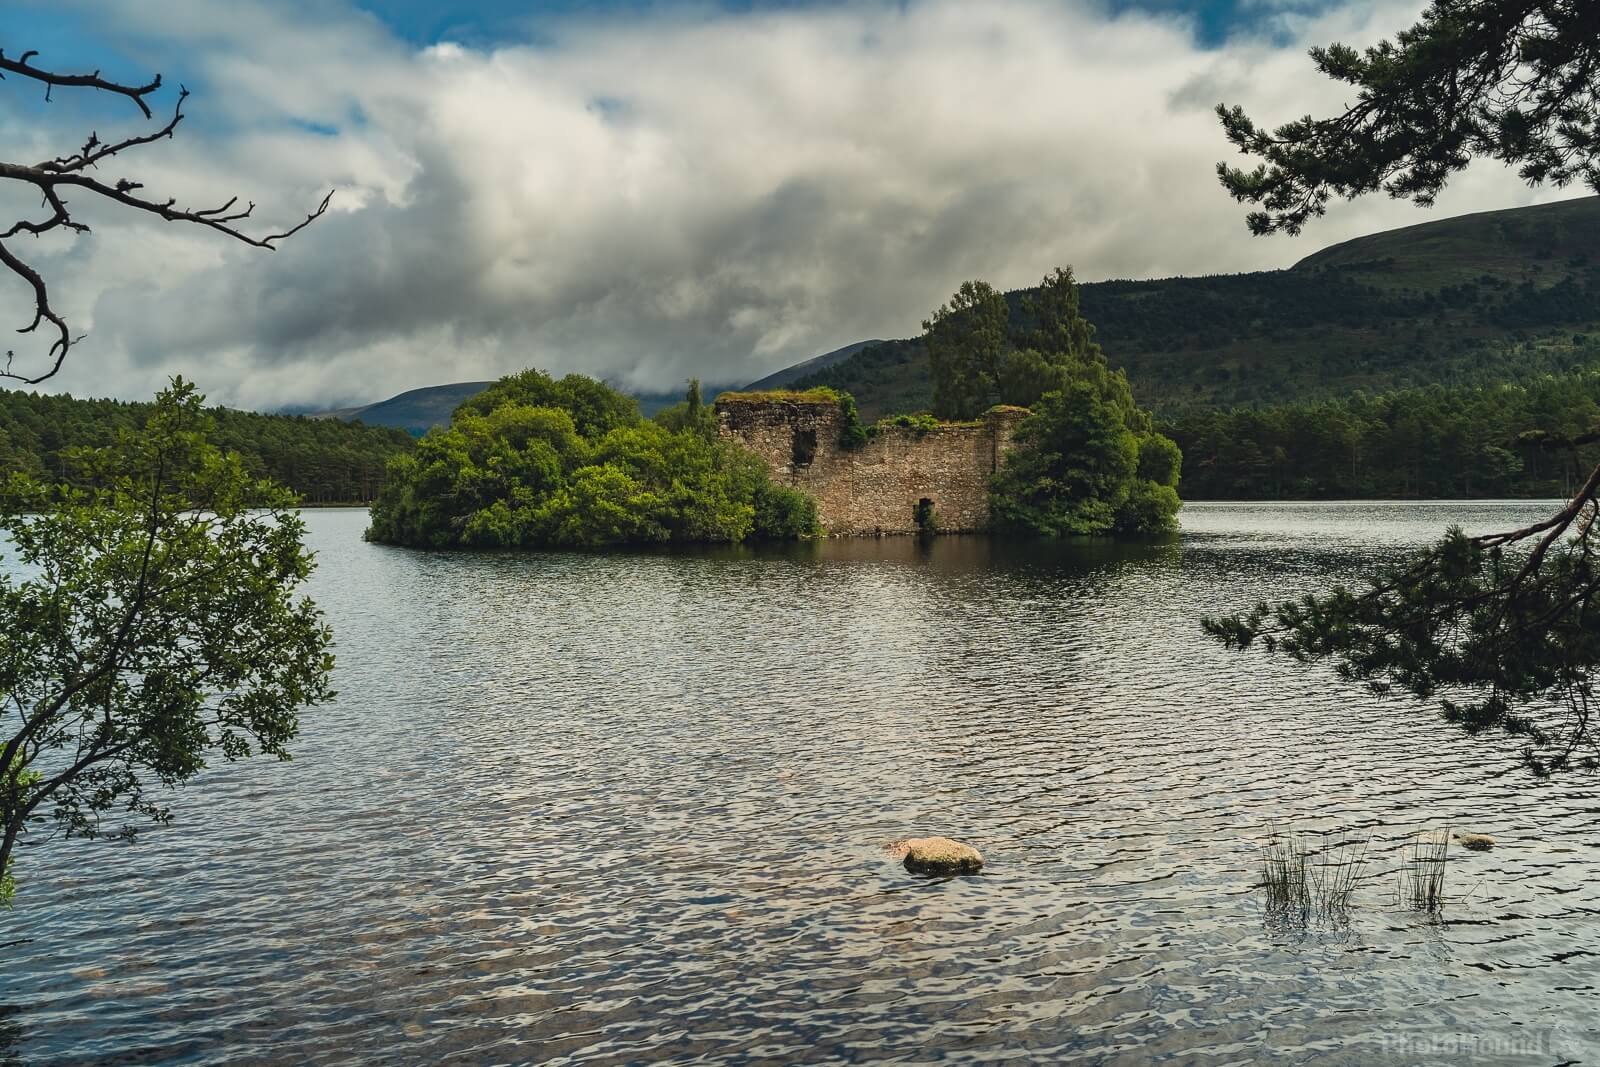 Image of Loch an Eilein by James Billings.